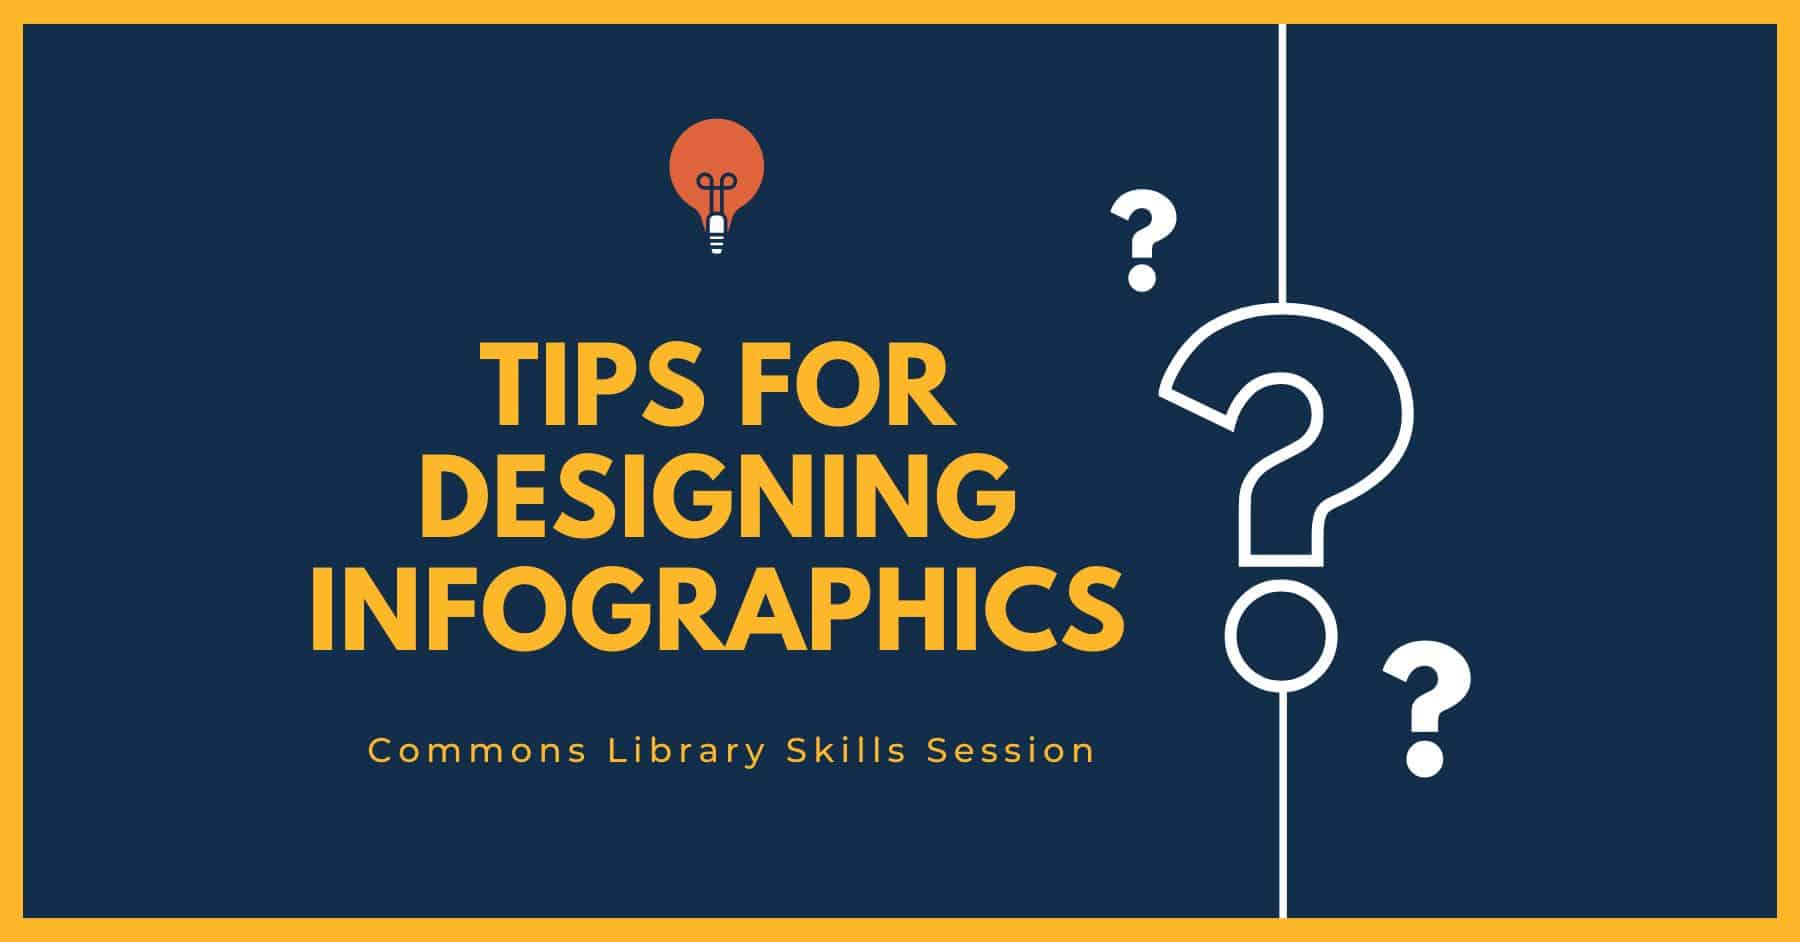 infographic about infographics